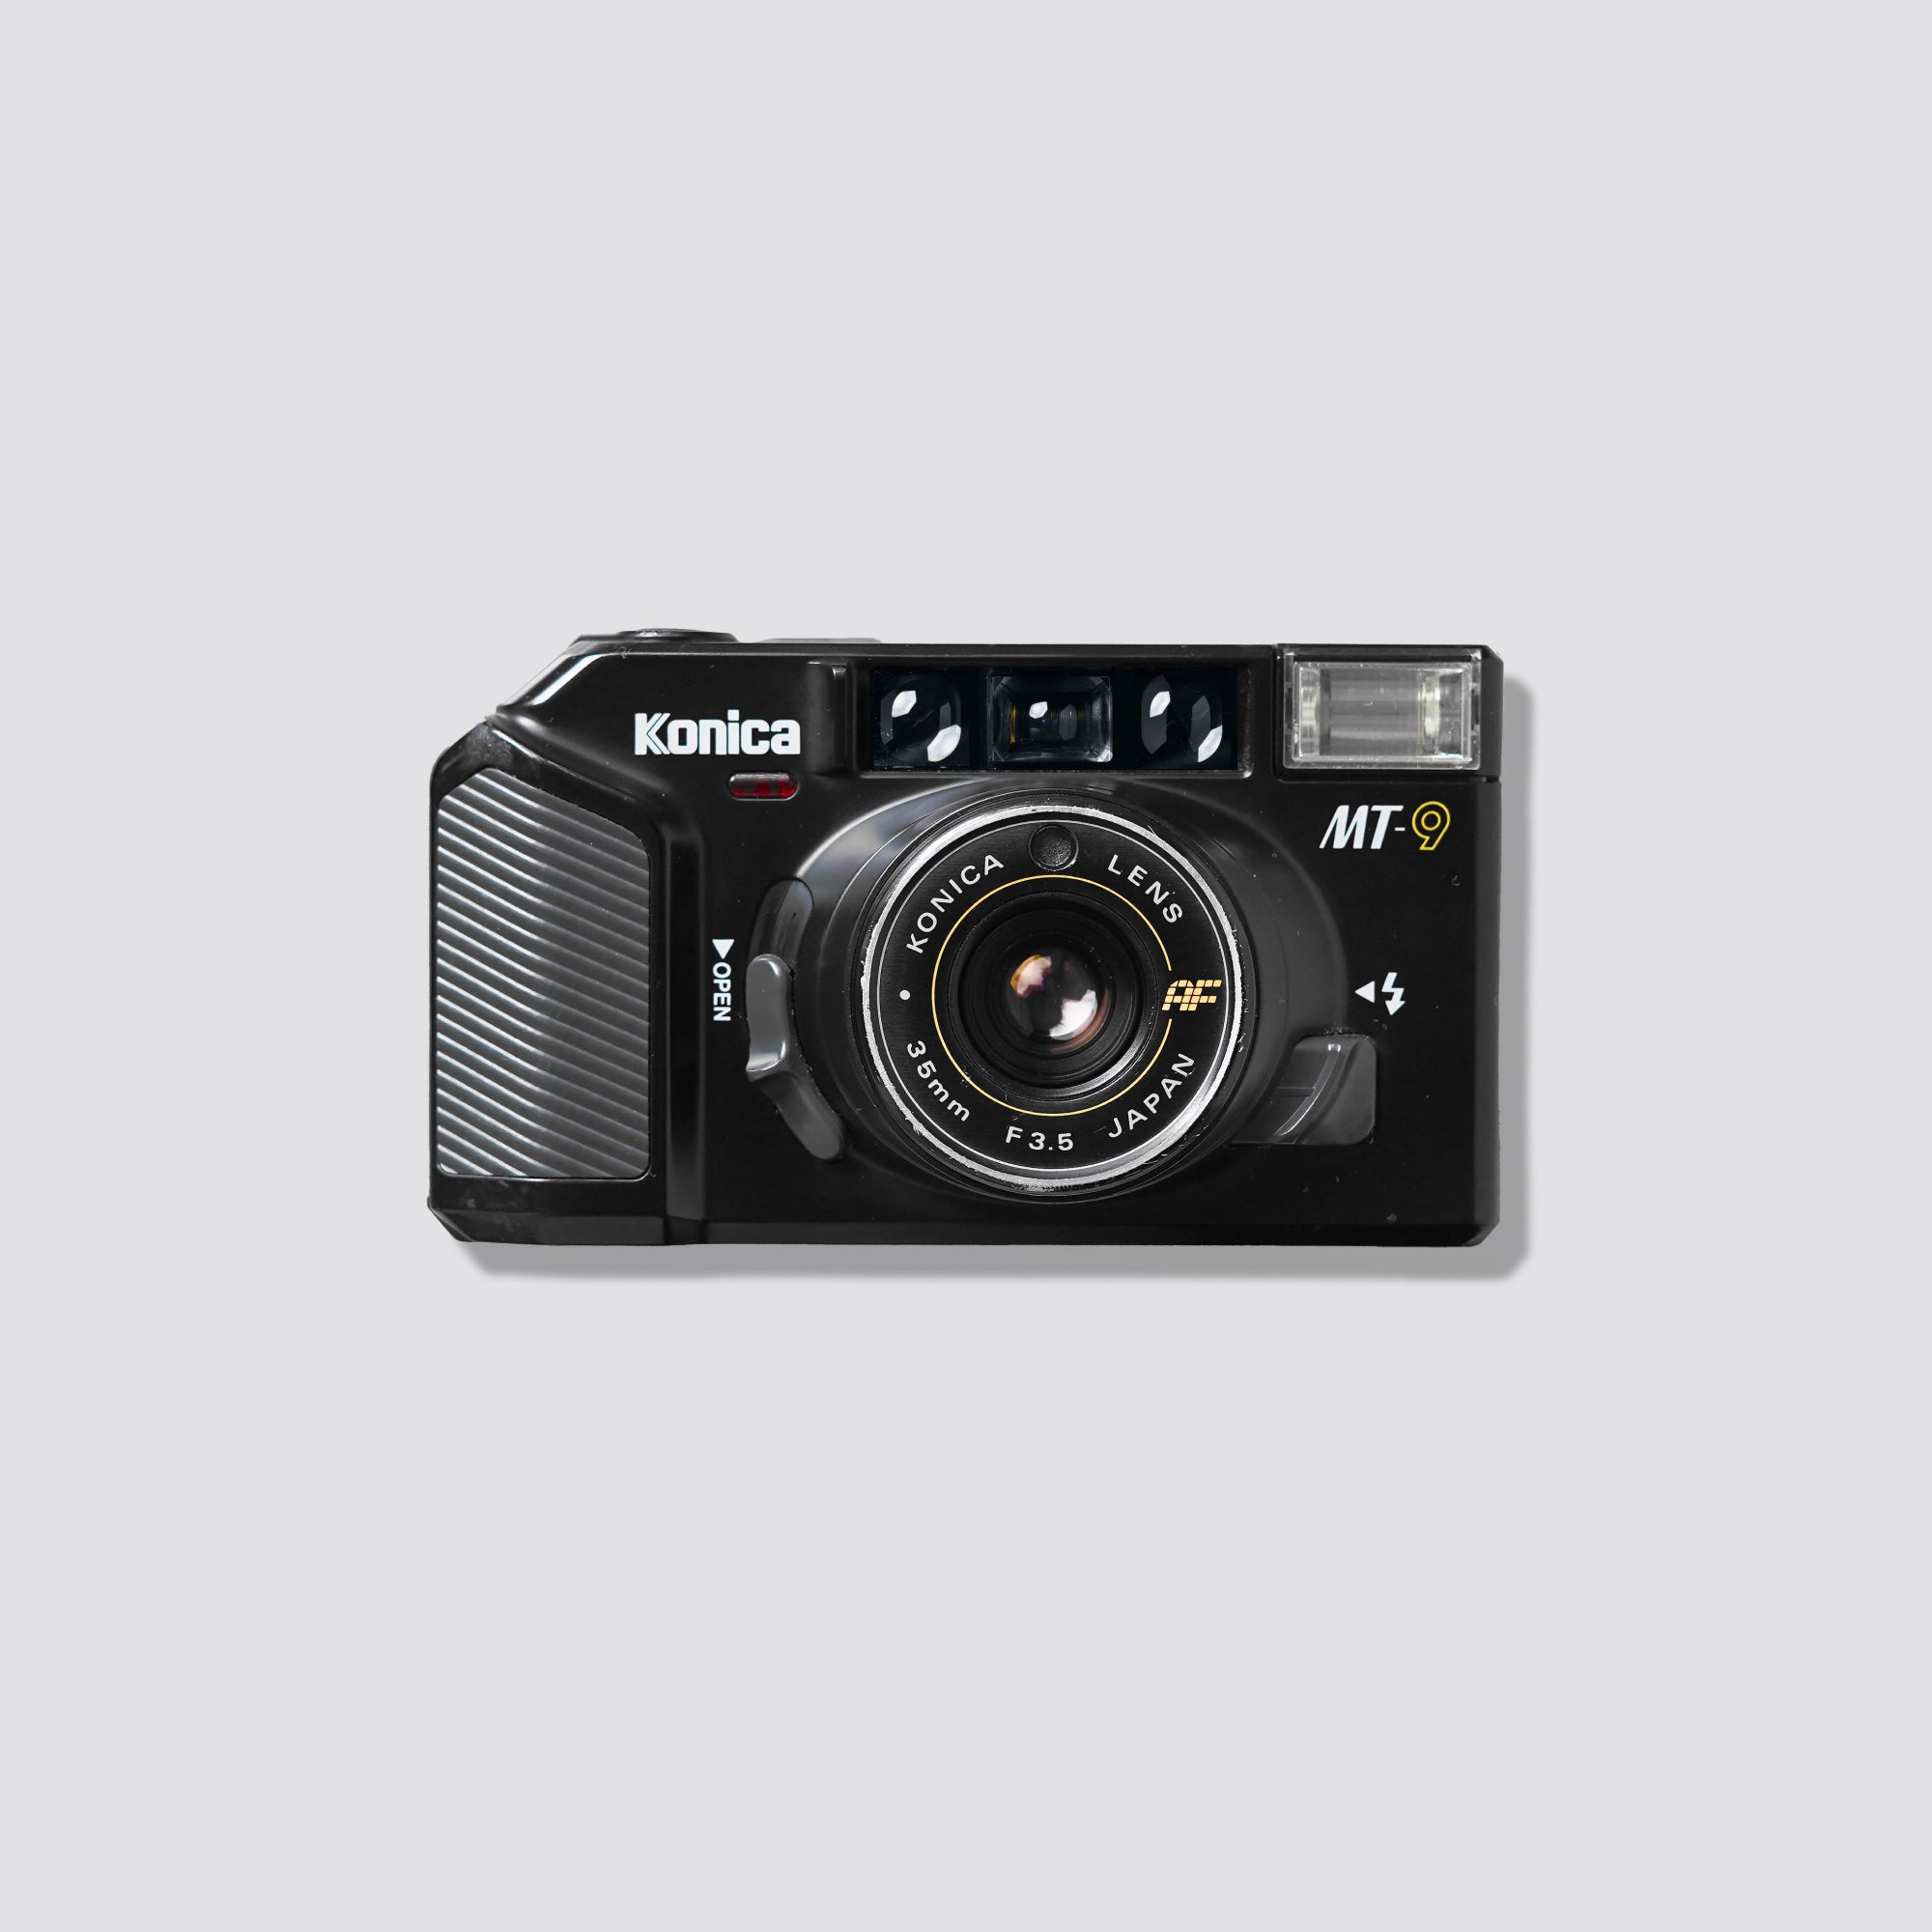 Buy Konica MT-9 now at Analogue Amsterdam